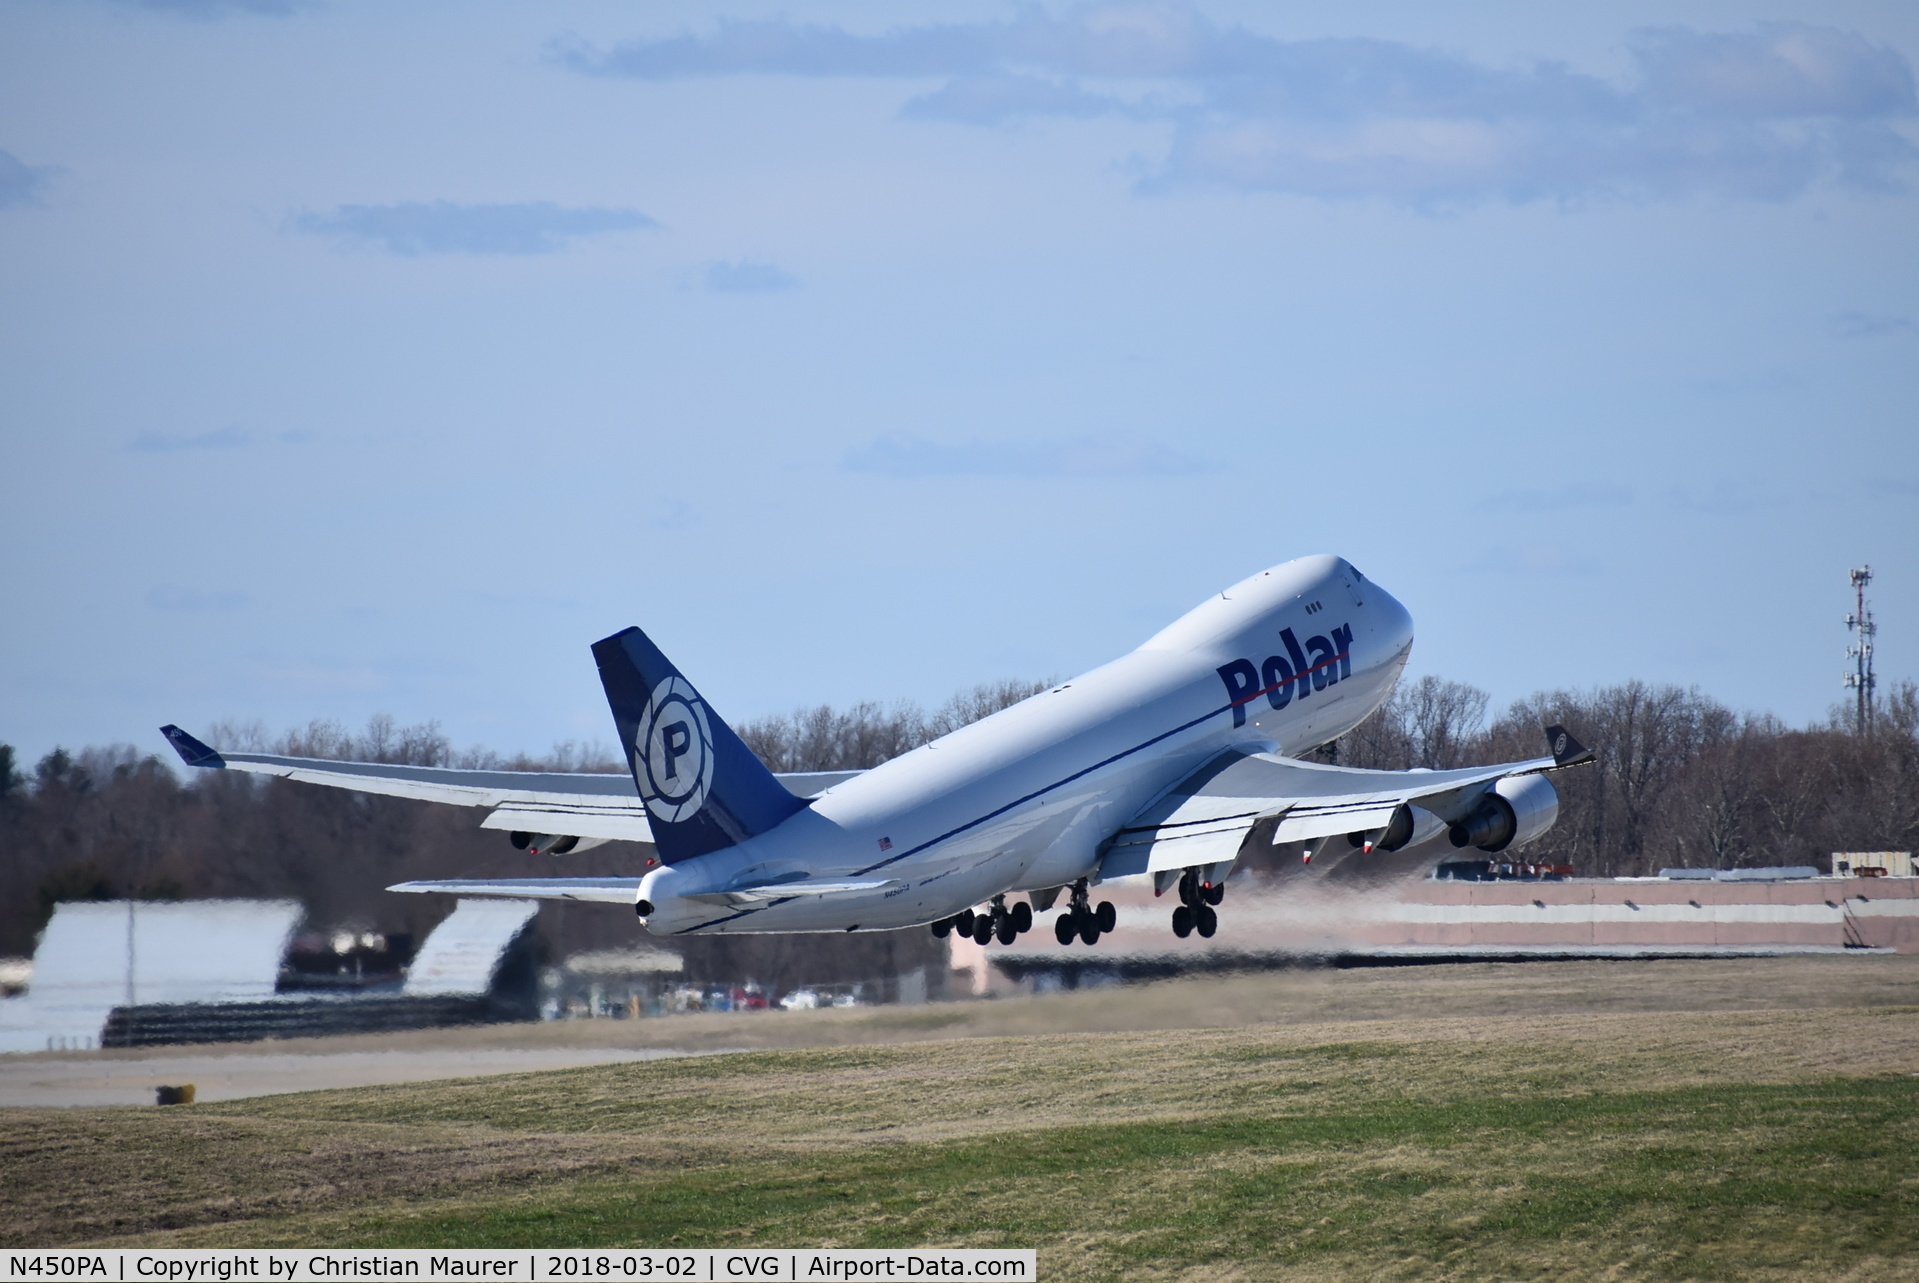 N450PA, 2000 Boeing 747-46NF C/N 30808, Polar Air Cargo 747-400F with serious wingflex